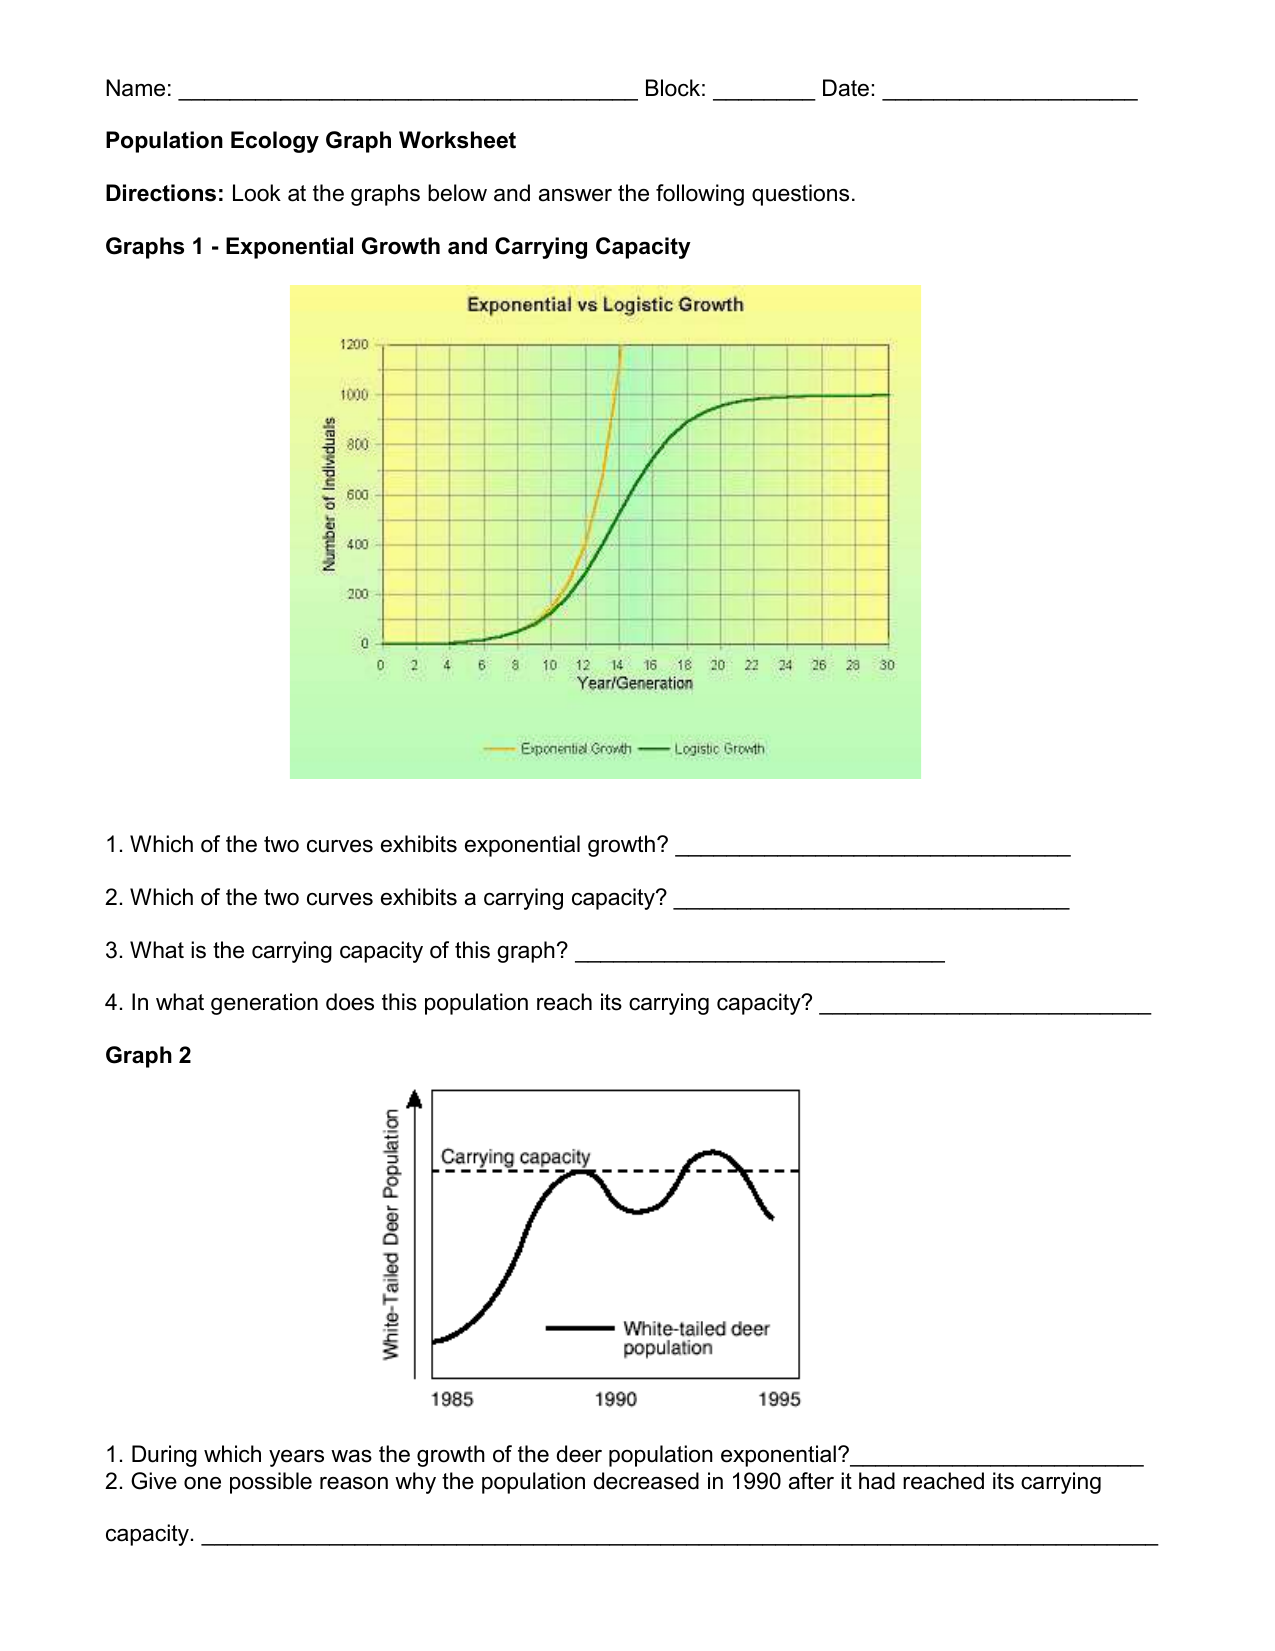 Population Ecology Graph Worksheet Within Population Ecology Graph Worksheet